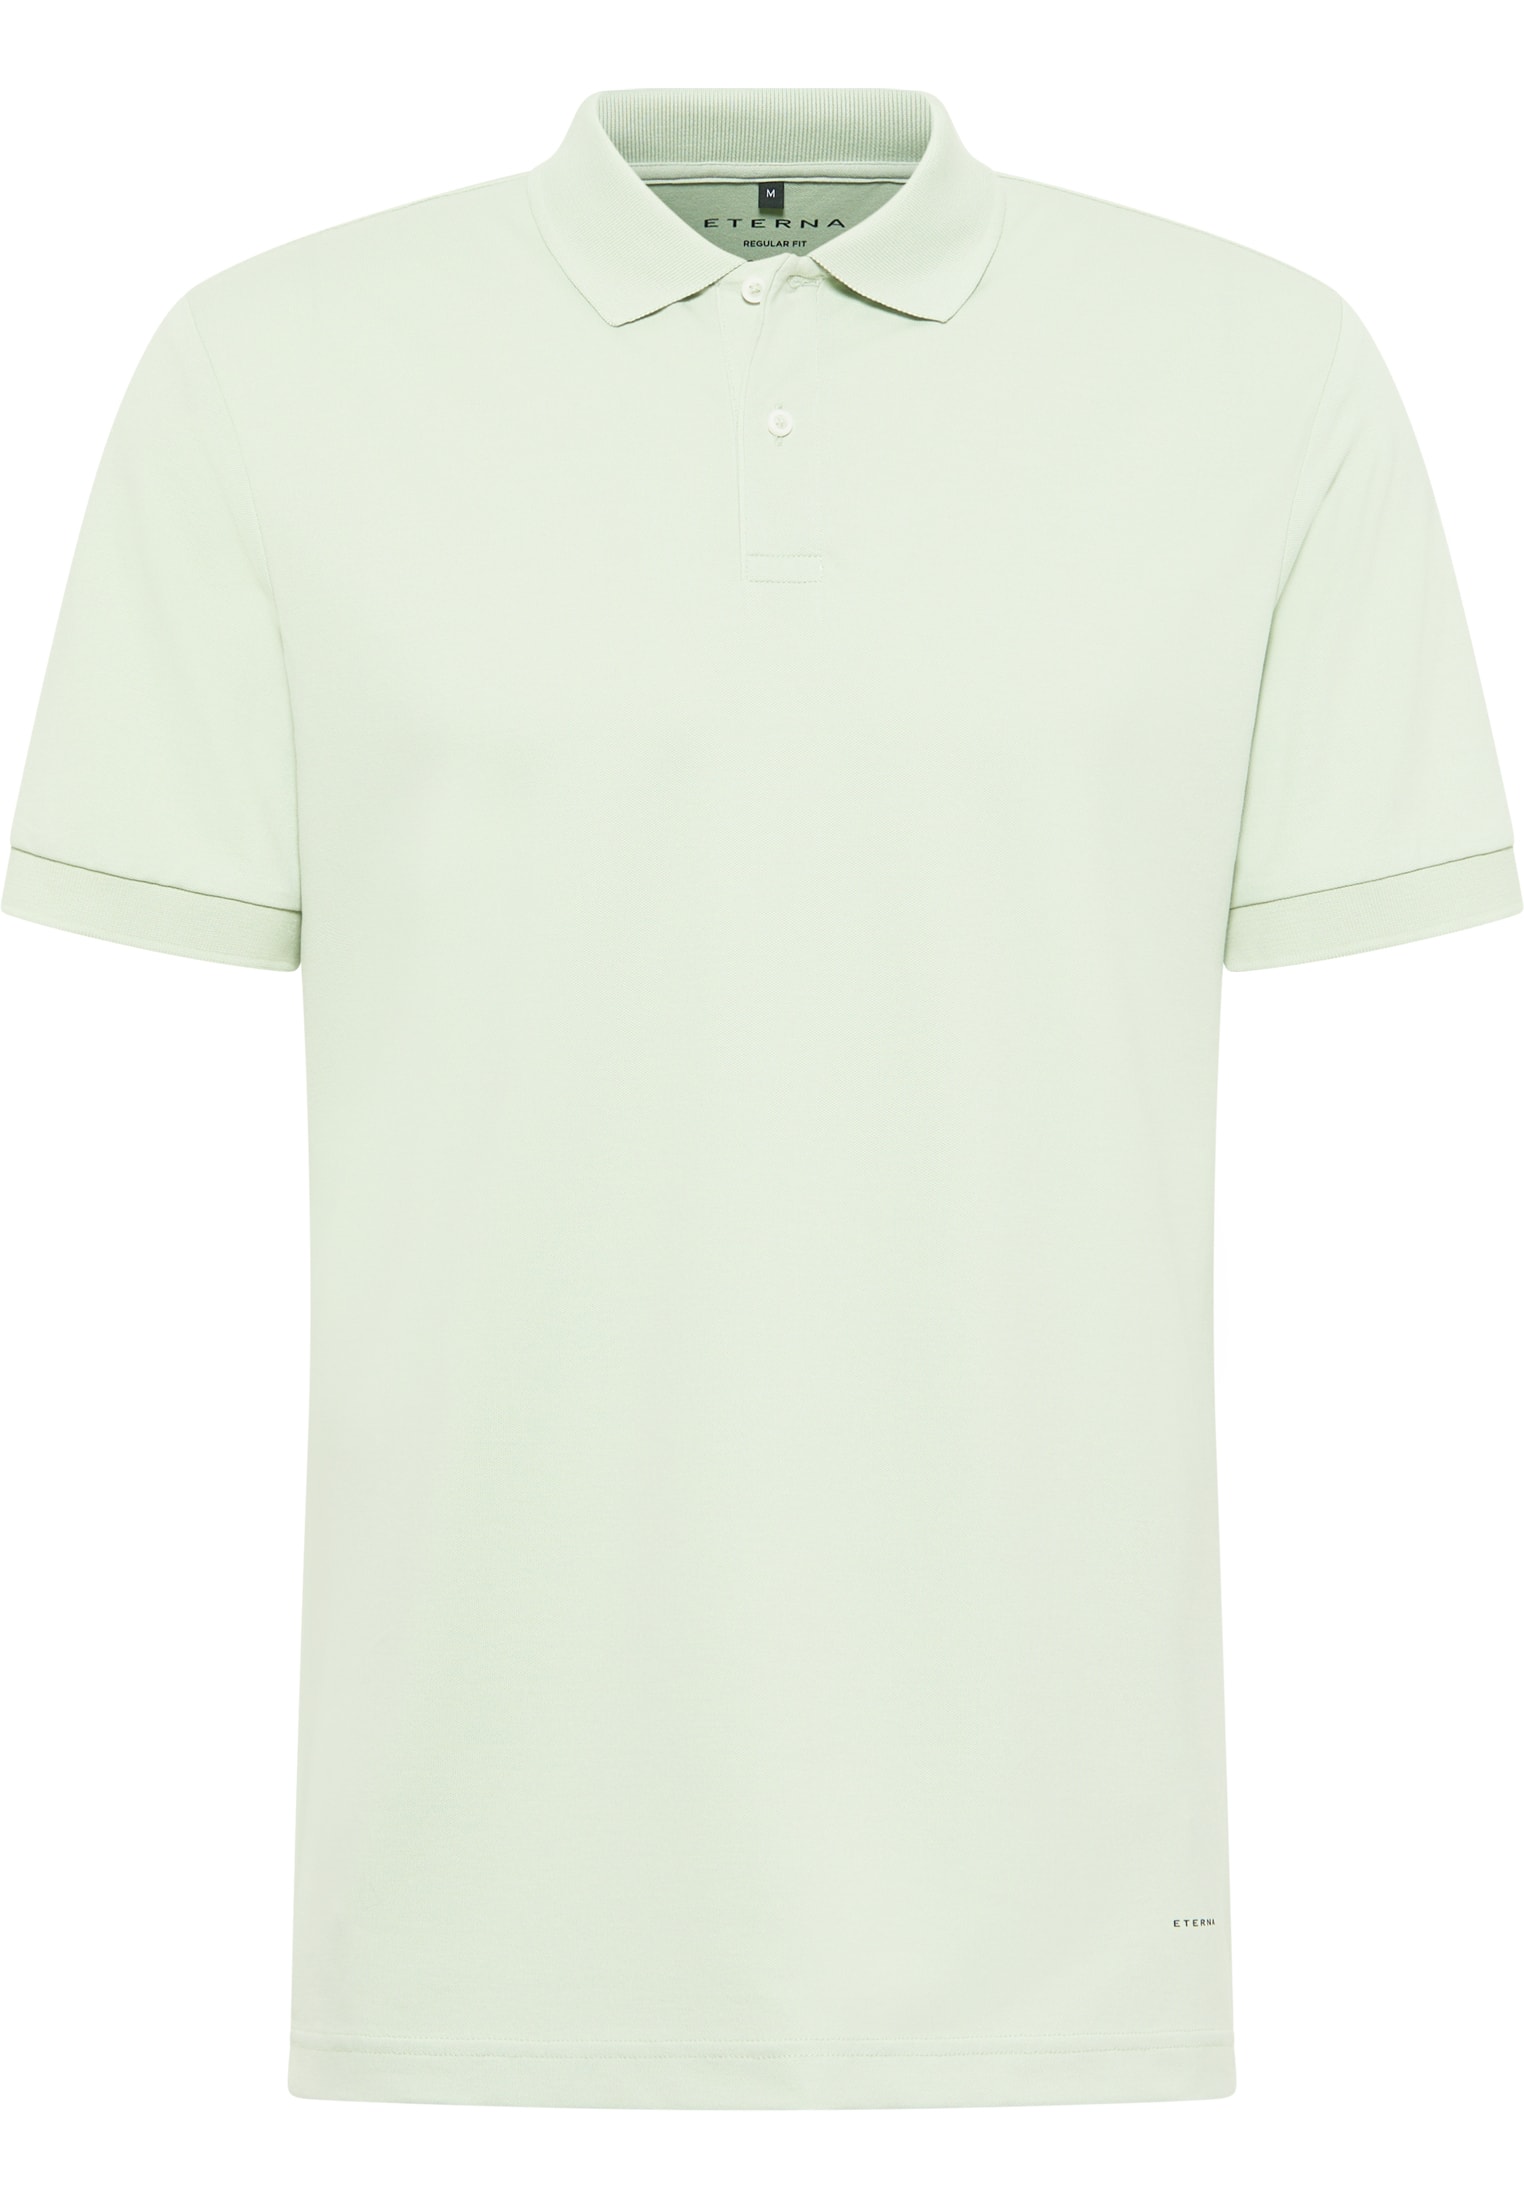 REGULAR FIT Polo shirt in olive plain